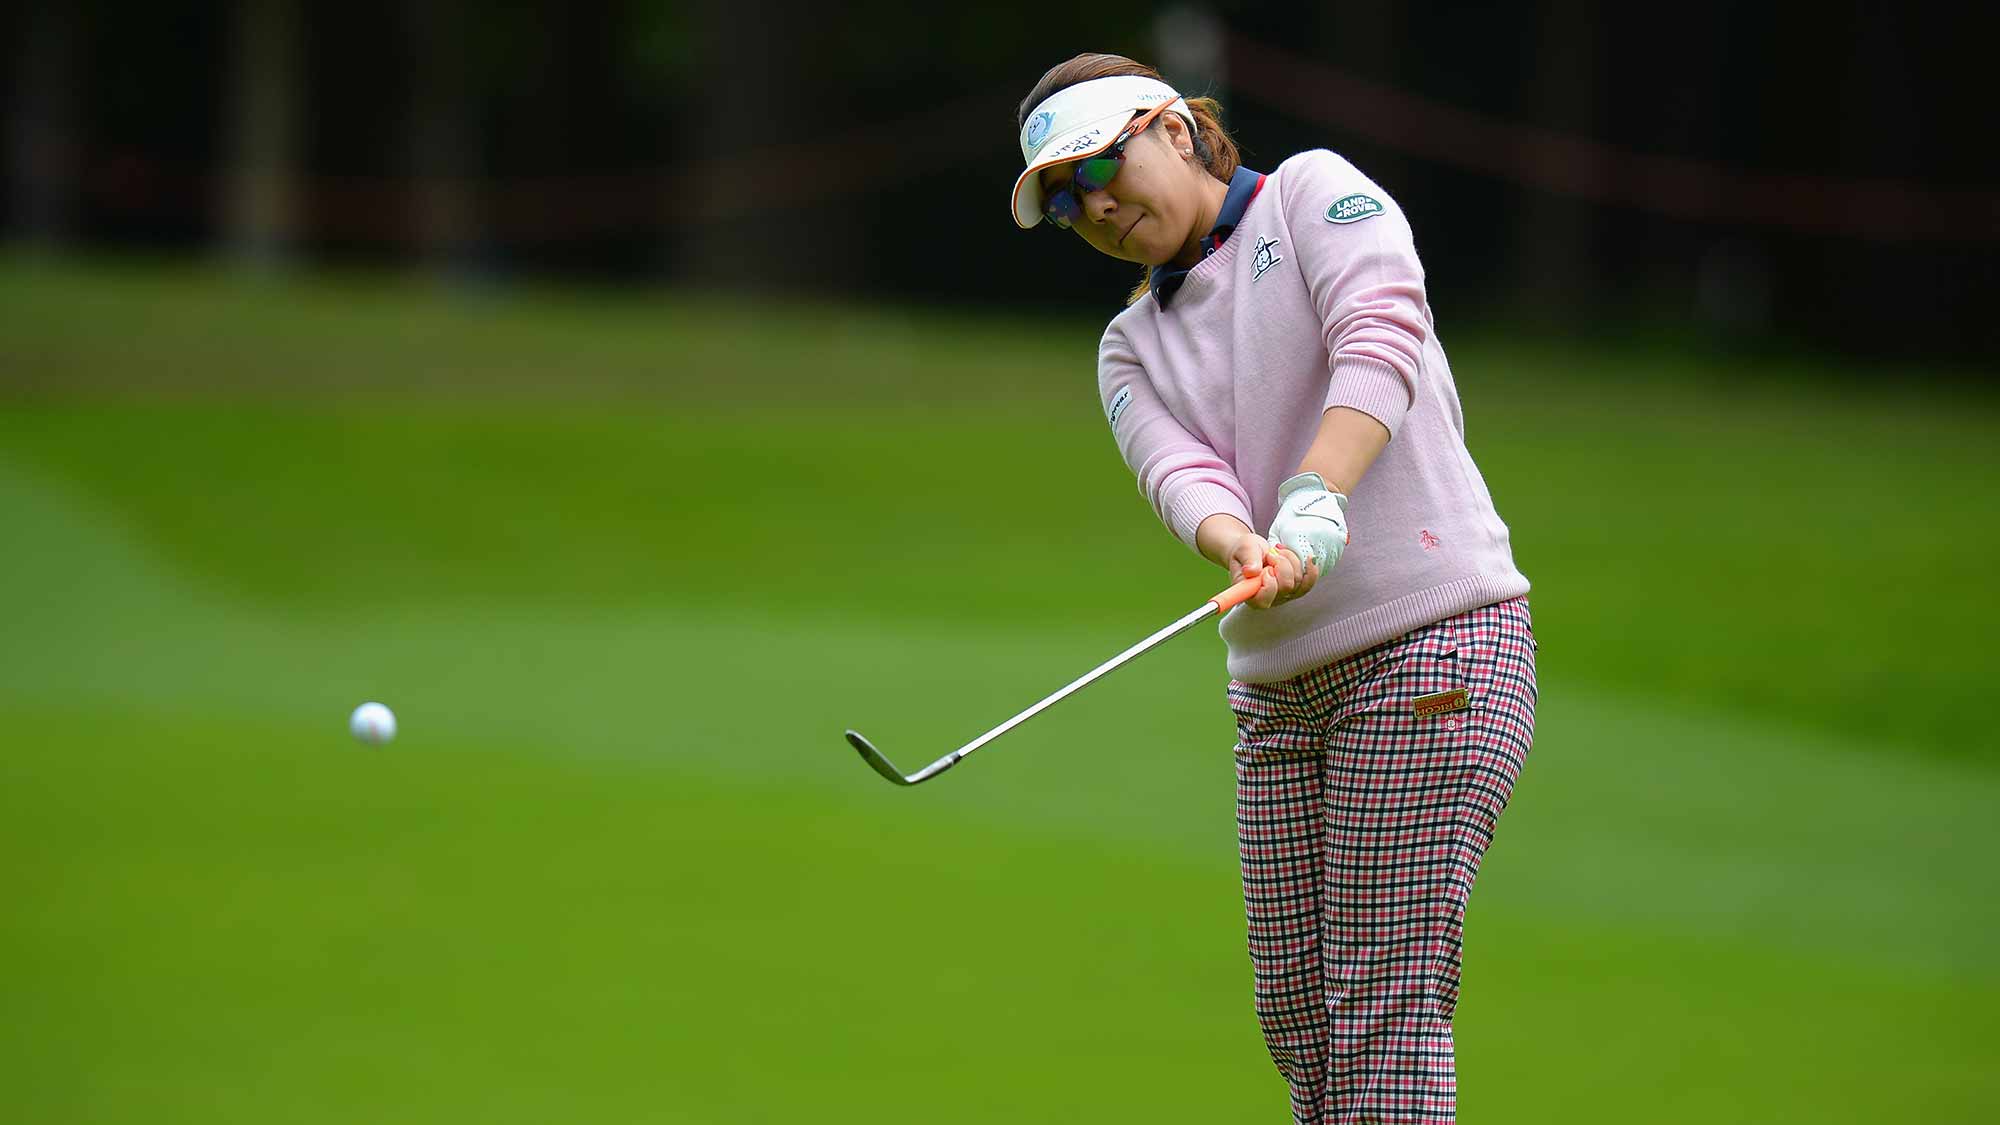 Mika Miyazoto of Japan chips on to the 4th green during the Ricoh Women's British Open